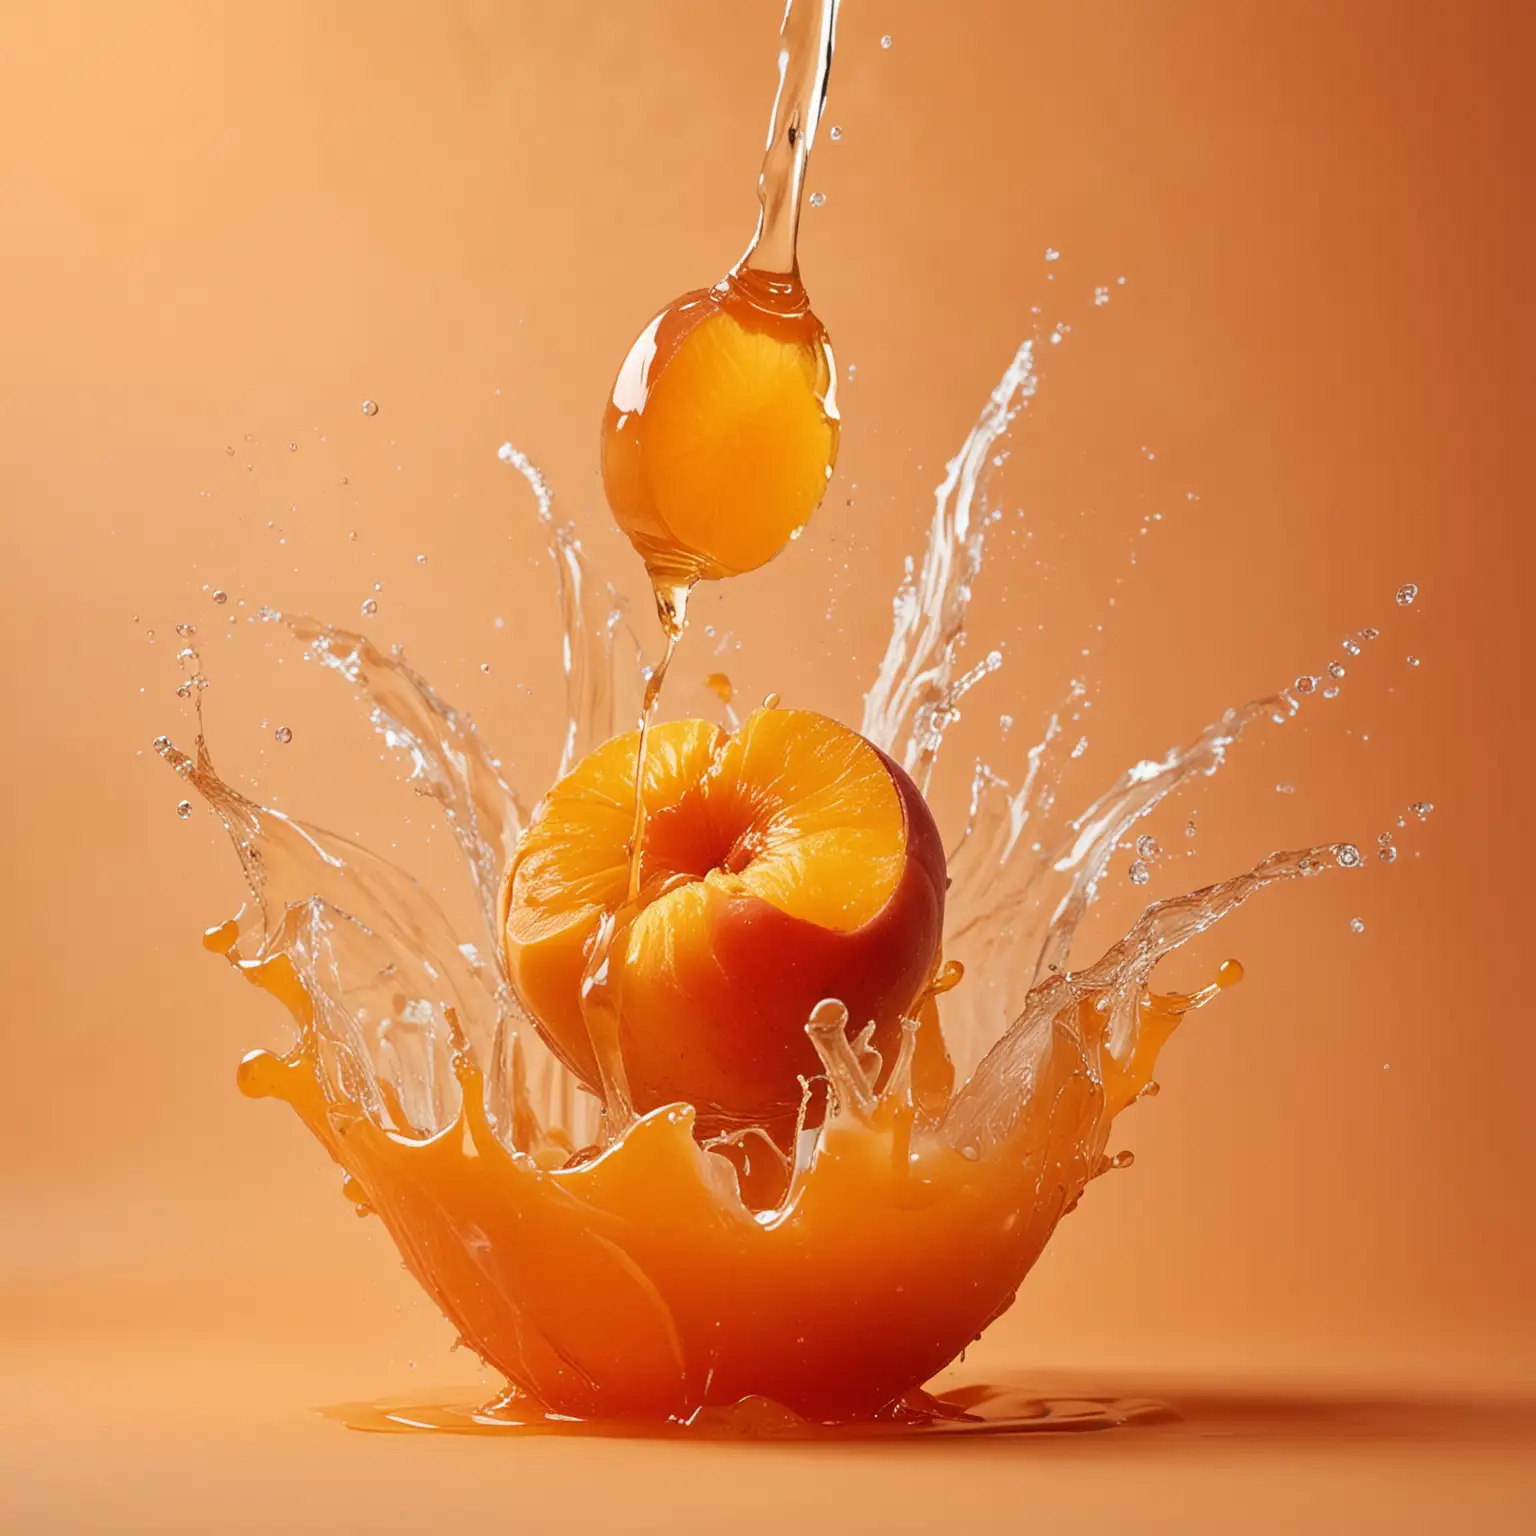 Vibrant-Peach-Honey-Splashes-Juicy-Water-Droplets-on-Down-Feathers-with-Orange-Background